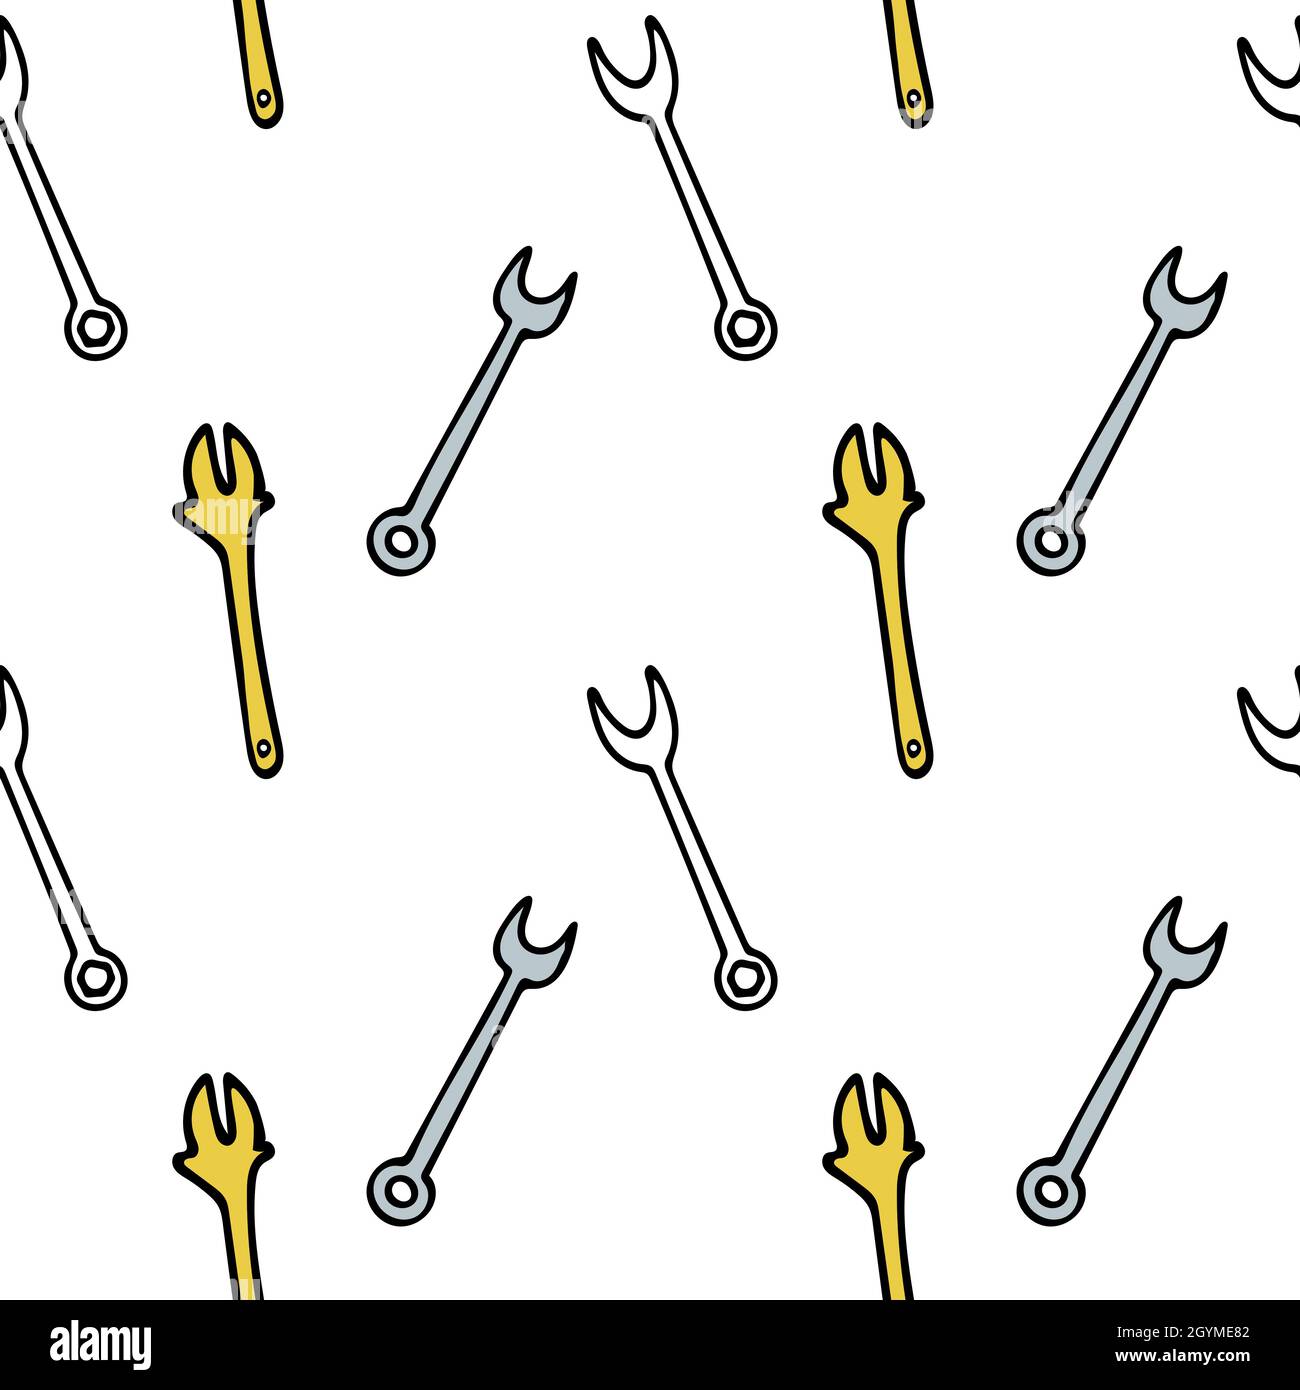 Seamless pattern with repair tools, adjustable wrench, spanner wrench. Vector illustration. Stock Vector